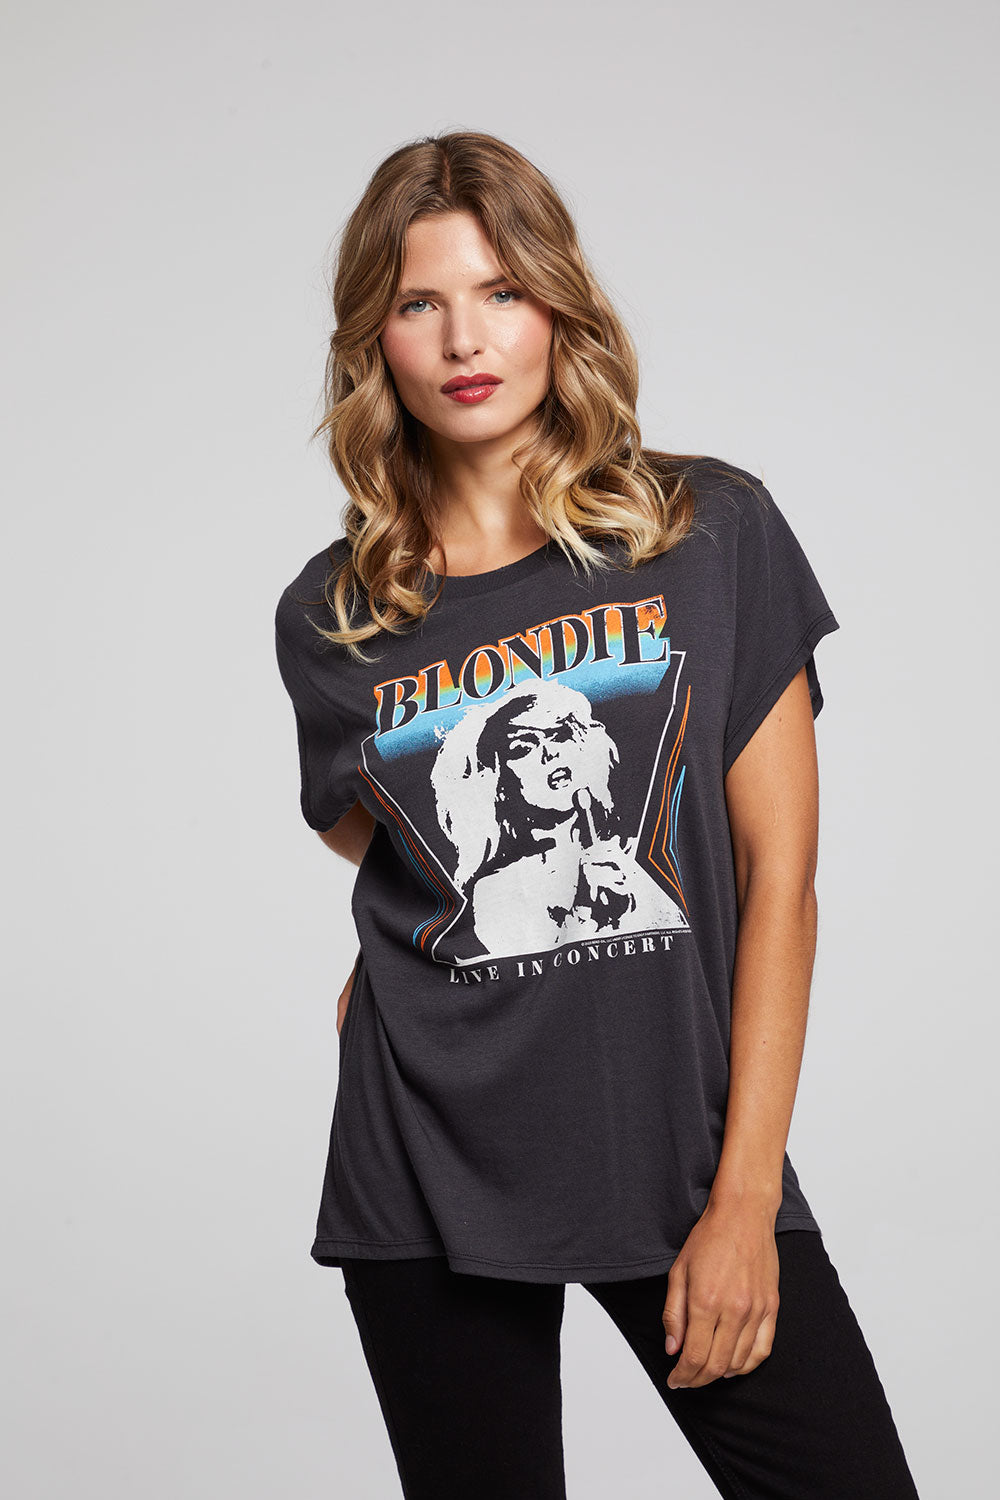 Blondie Live in Concert Tee WOMENS chaserbrand